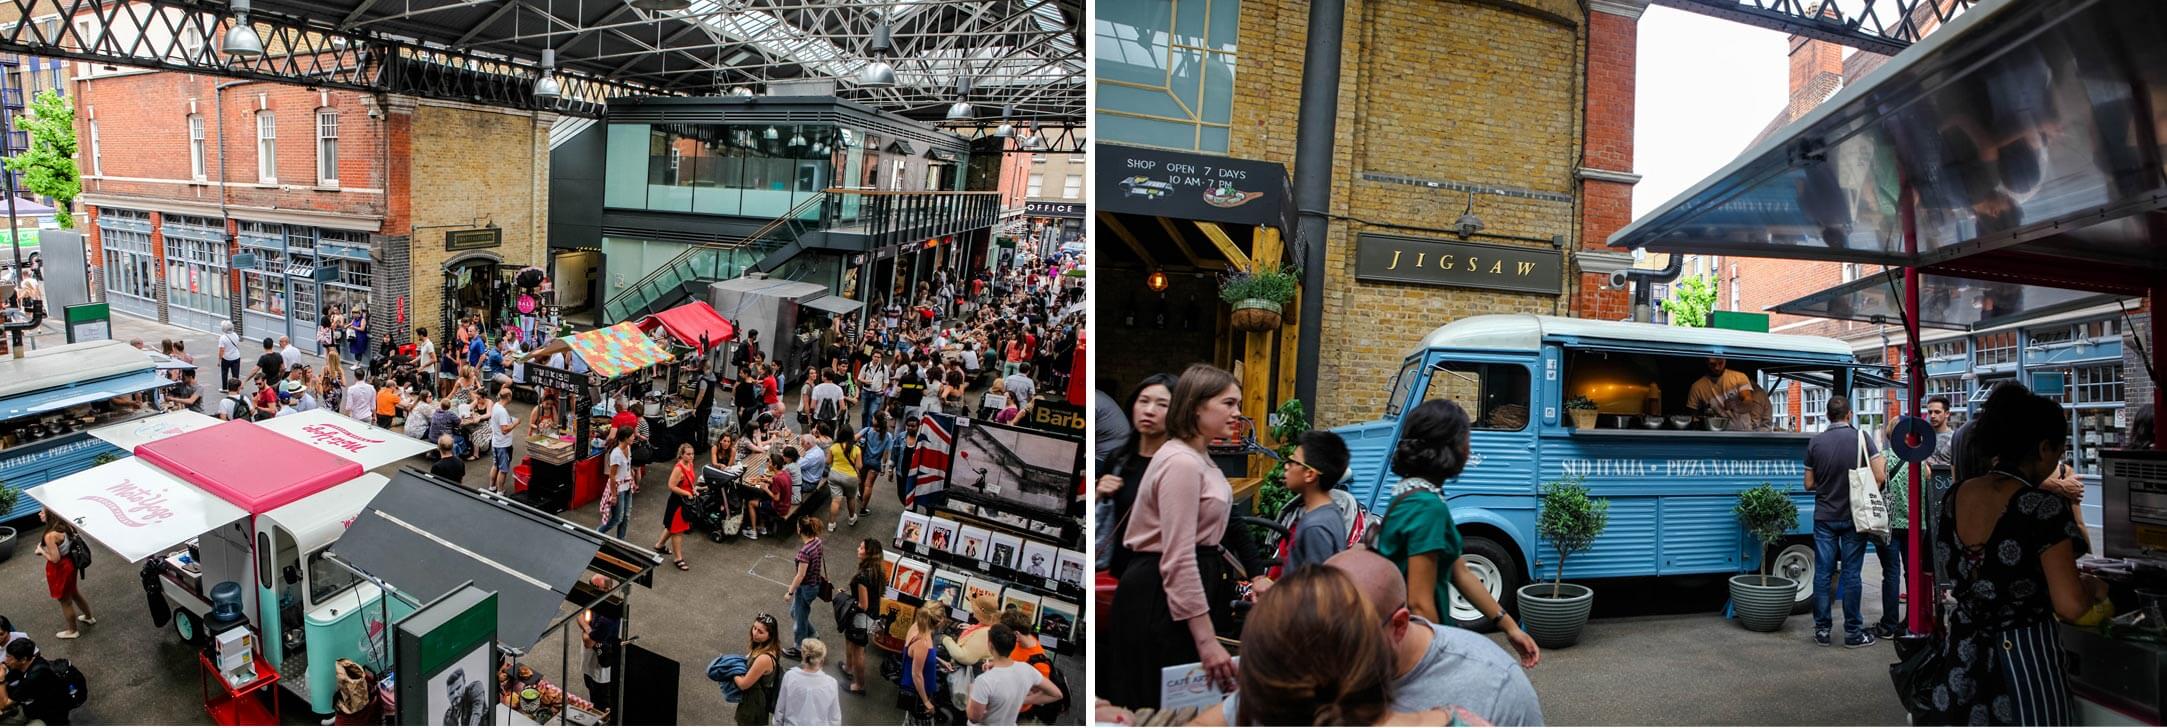 Things to do in Hoxton - Spitalfields Market